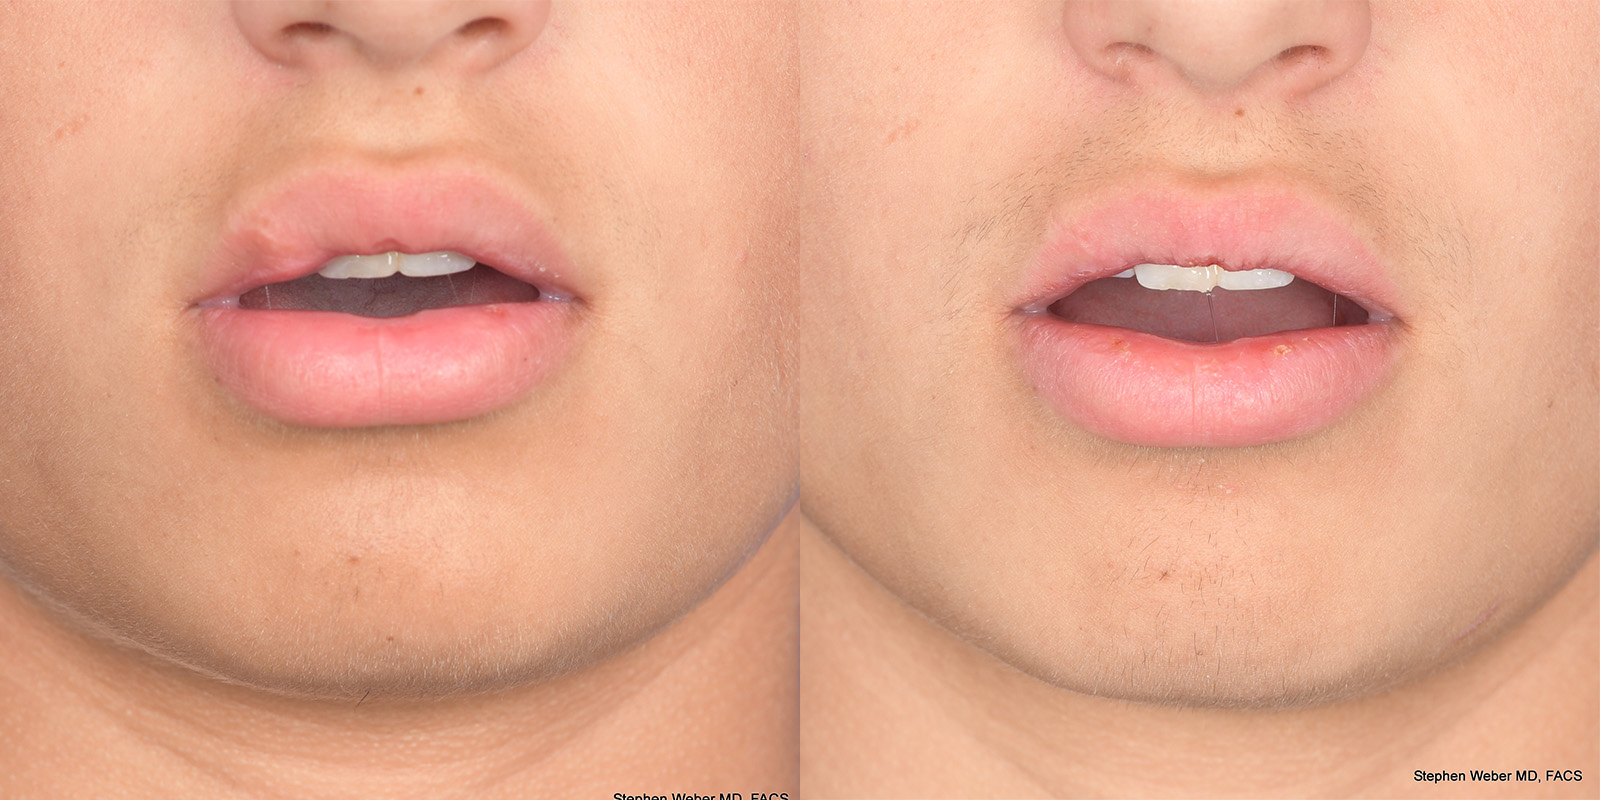 Scar Revision Before and After | Weber Facial Plastic Surgery